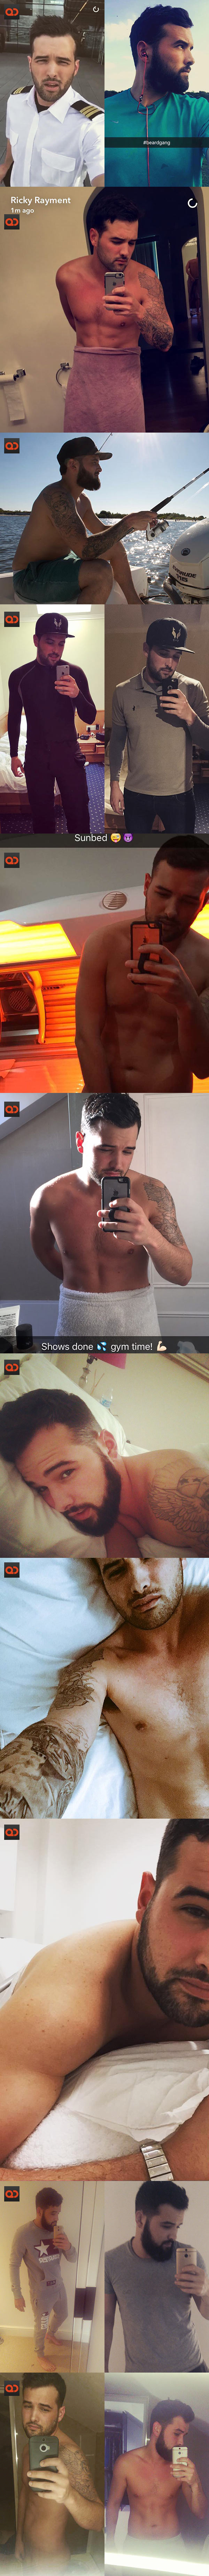 Ricky Rayment, From British Reality Show The Only Way Is Essex, Once Again Caught Sending Nudes - New Dick Pics In Fully Hard Mode Leak!